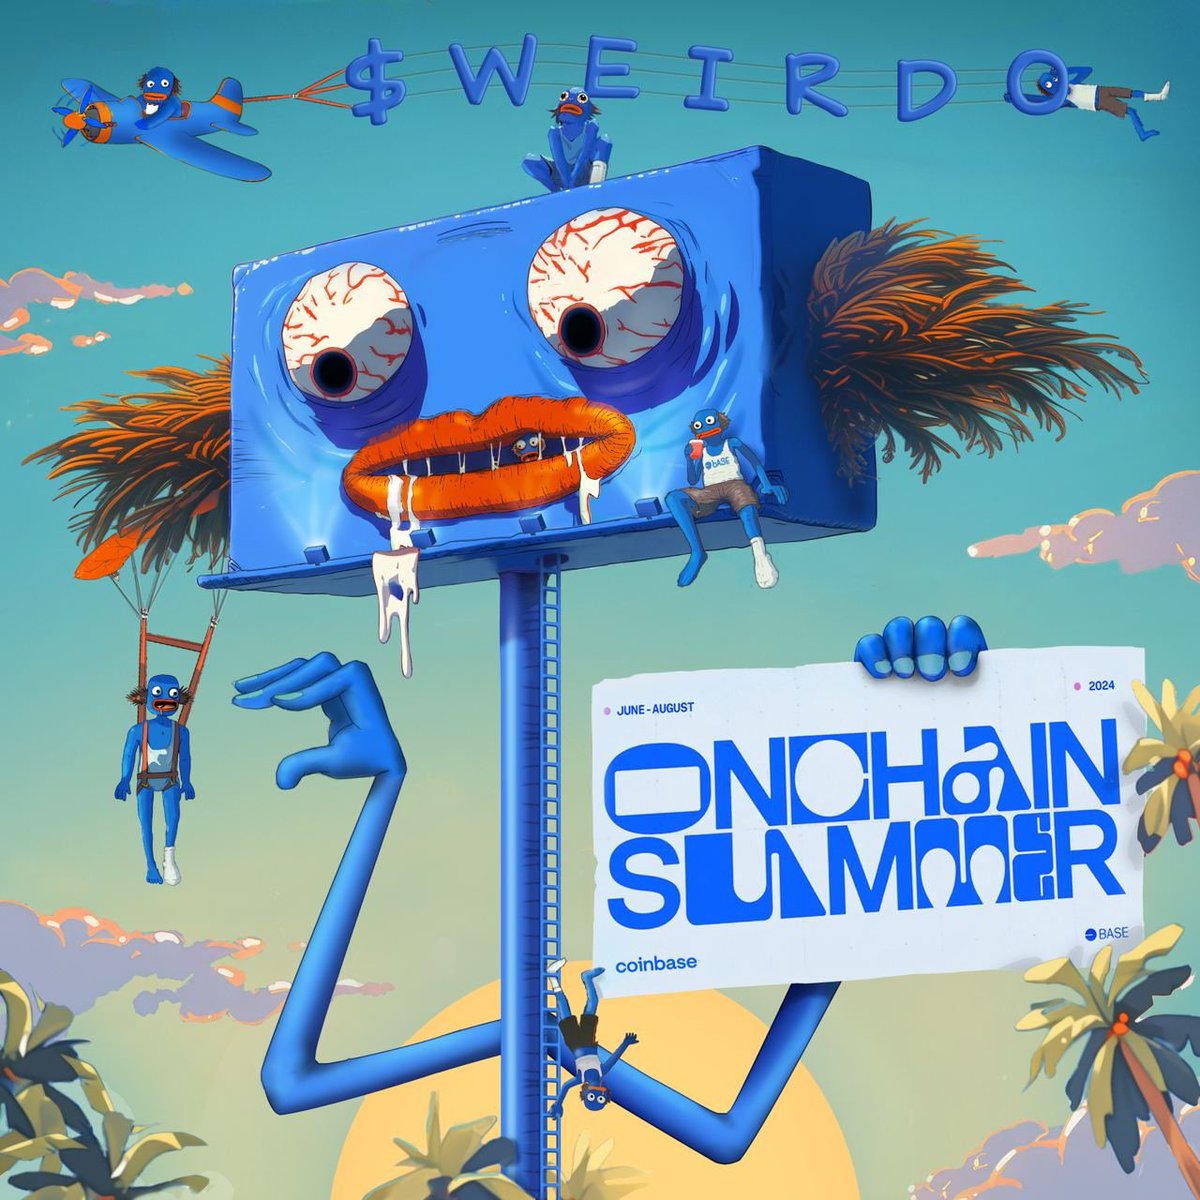 The dogs days are over!
You either a $Weirdo or a $Normie

#Ethereum #BaseChain #BaseMemeCoin #meme #blue #paint #crypto #cryptocurrency #bitcoin #jessepollak #art #cryptomeme #investing #cryptoinvestor #BASED #summer #Solana #CommunityBuilding